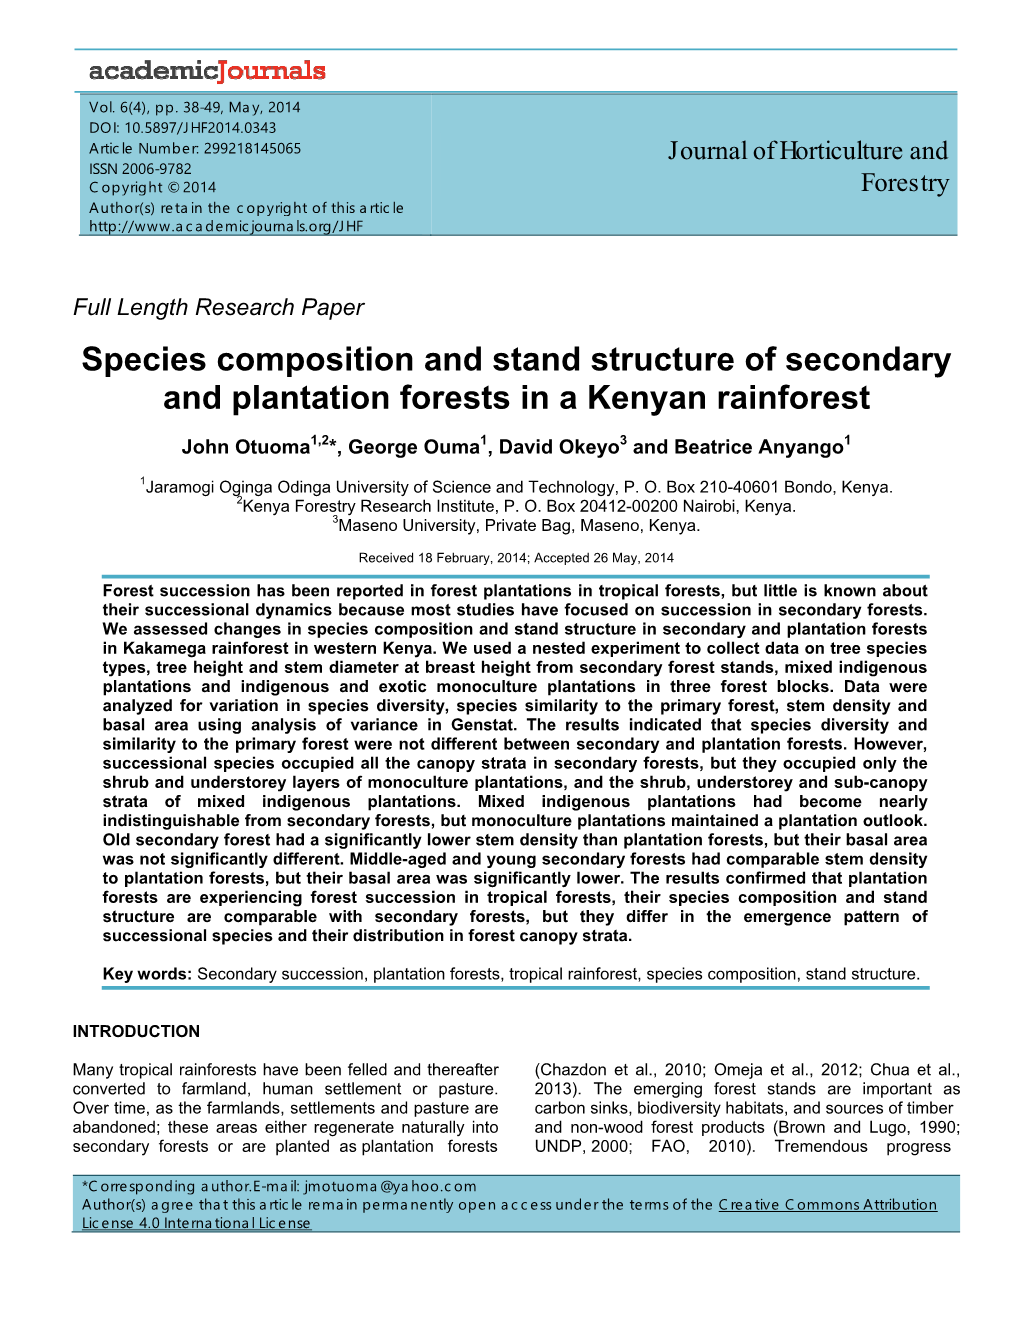 Species Composition and Stand Structure of Secondary and Plantation Forests in a Kenyan Rainforest